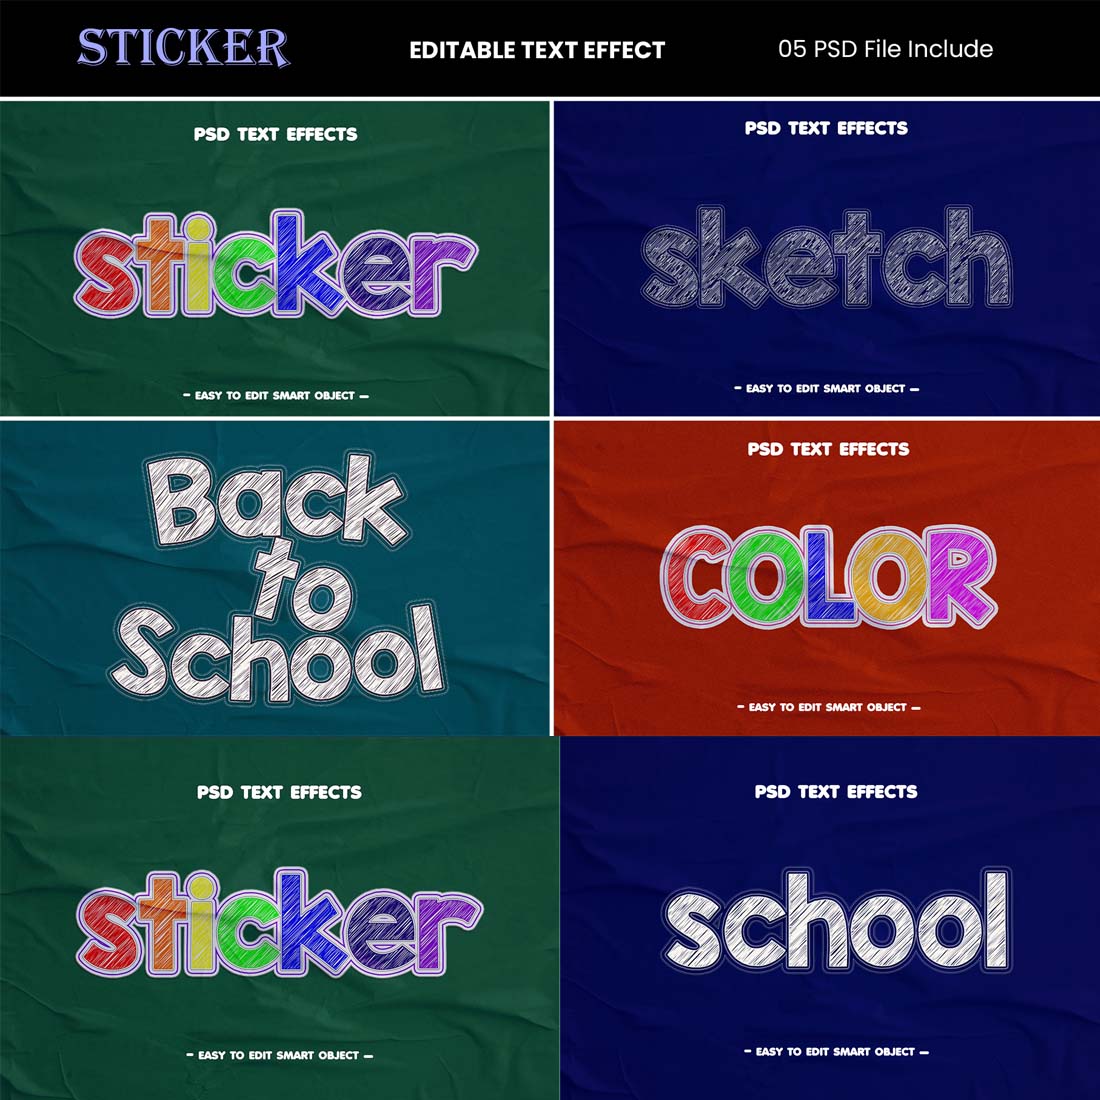 Editable Sticker Text Effect cover image.